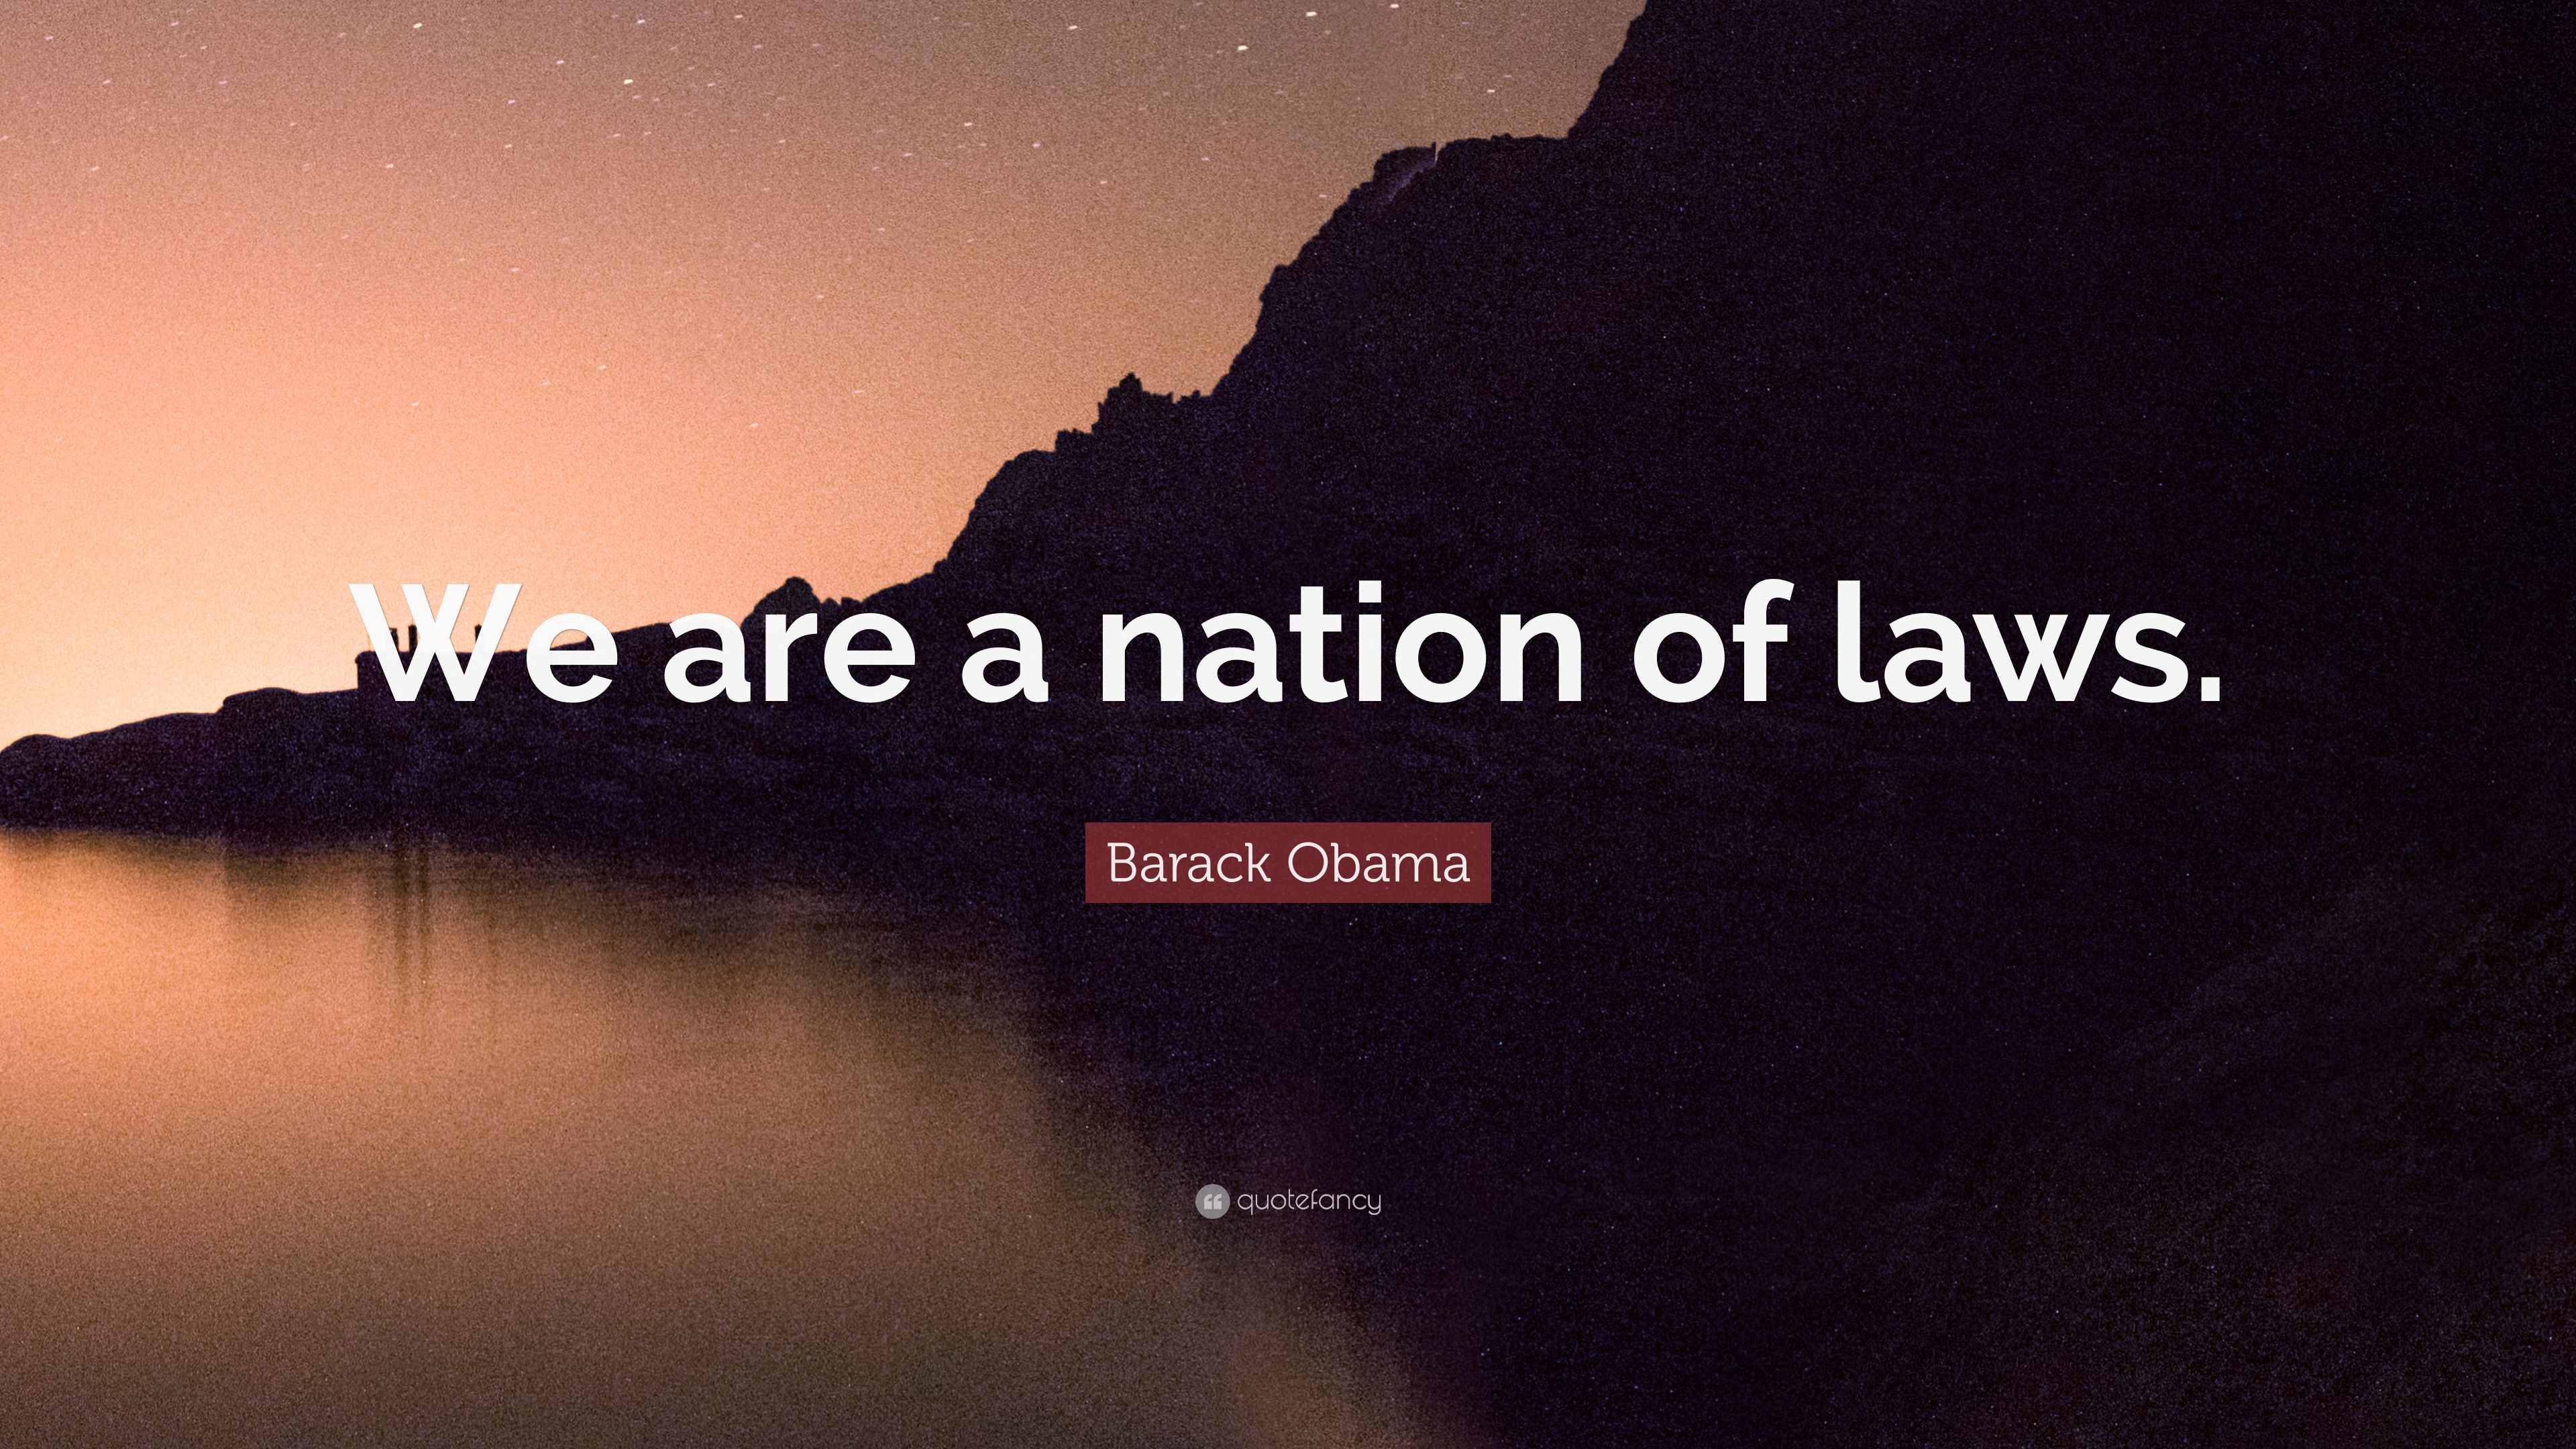 Barack Obama Quote: “We are a nation of laws.” 7 wallpaper